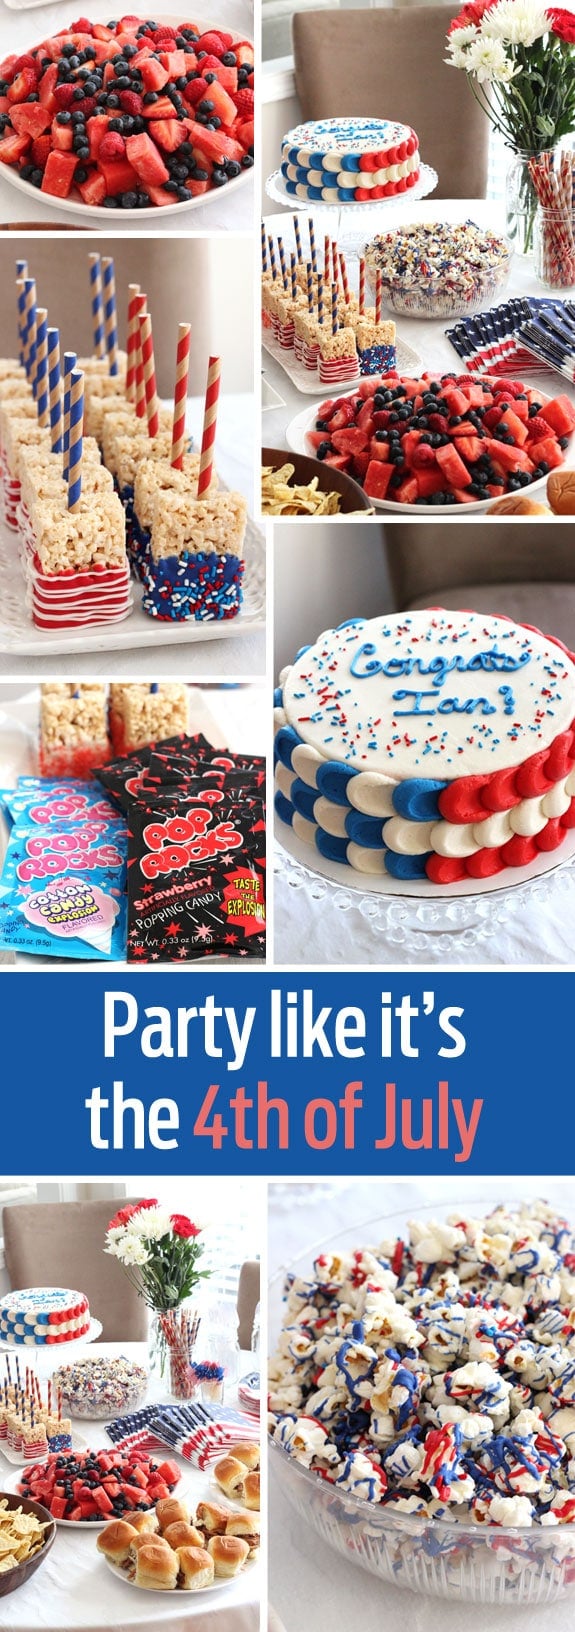 Collage of 4th of July party recipes